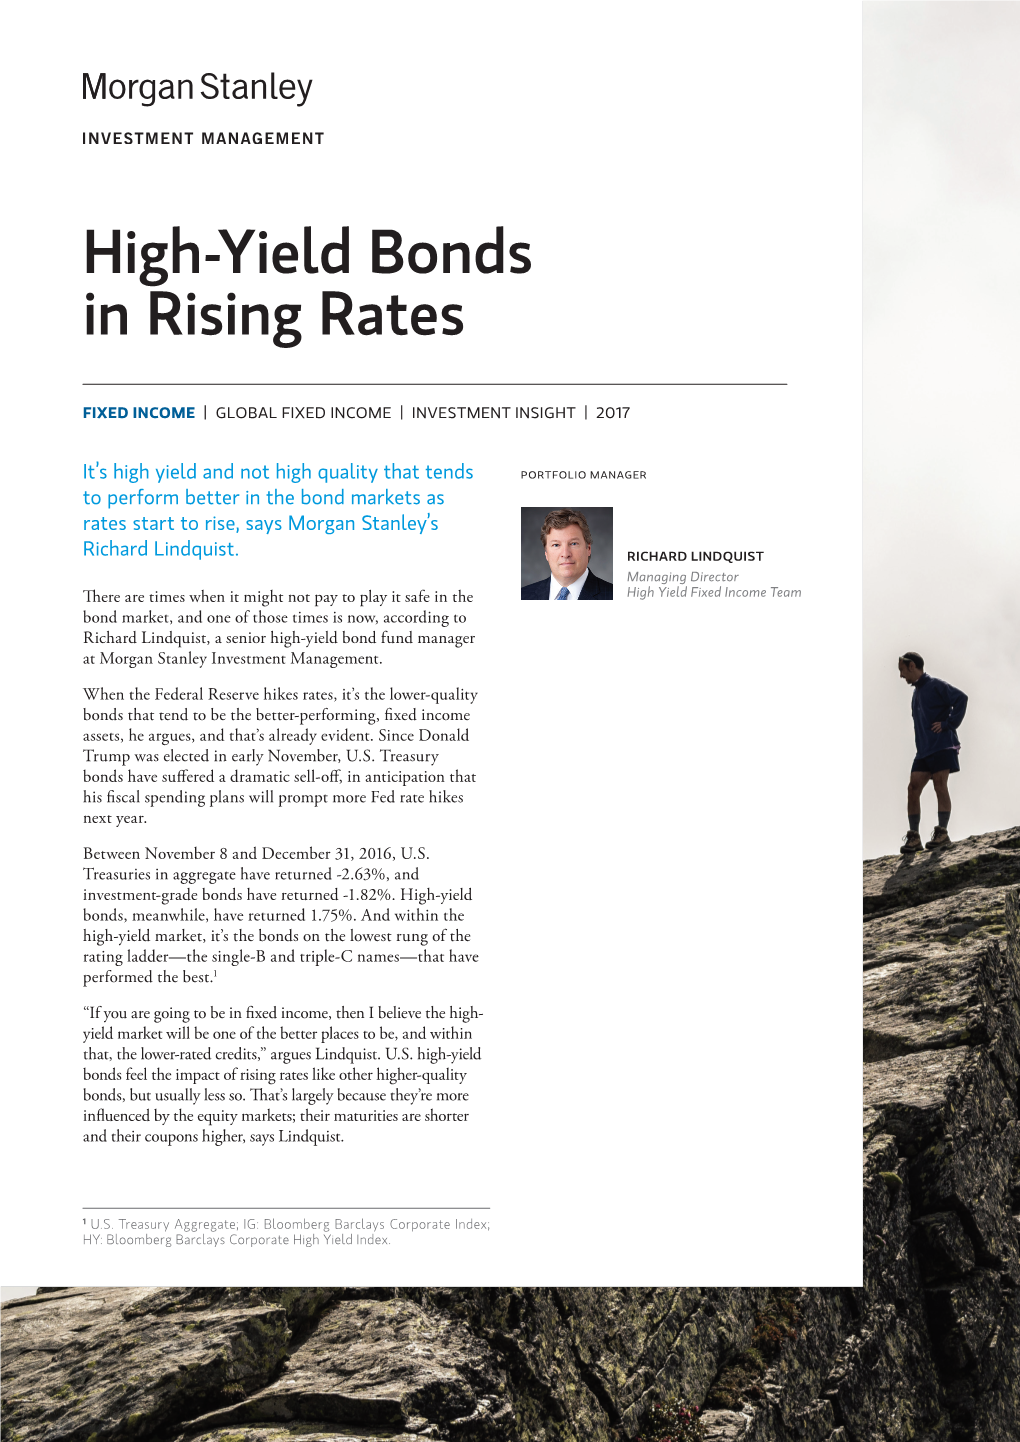 High-Yield Bonds in Rising Rates